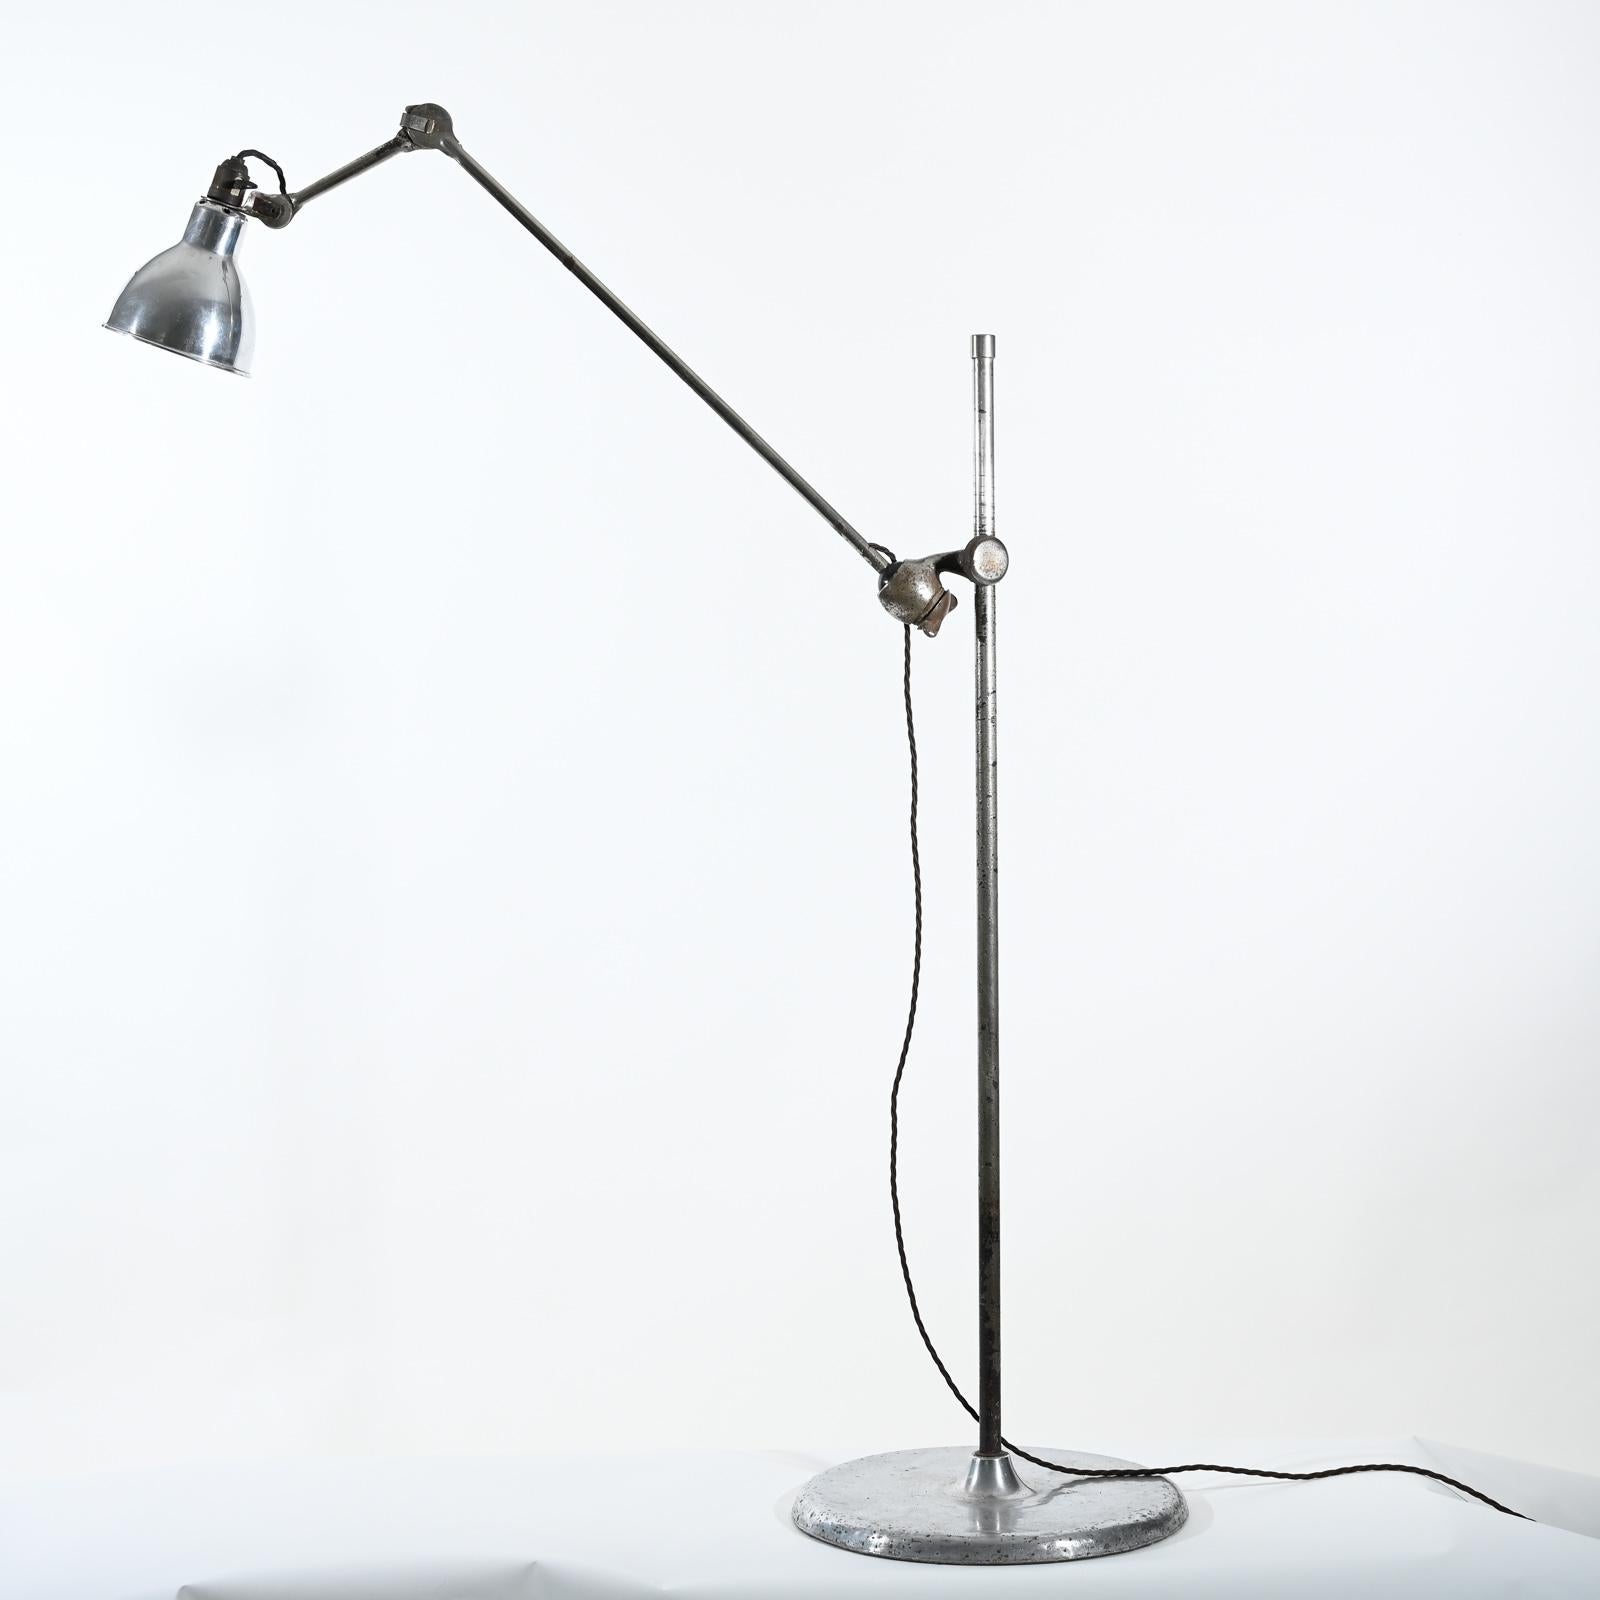 Rare nickel-plated and aluminium Gras model 215 mobile floor lamp with aluminium “Normal” lampshade produced in 1930. 

The Gras lamp became popular when Le Corbusier started to use them first in his offices and then for his customer projects.